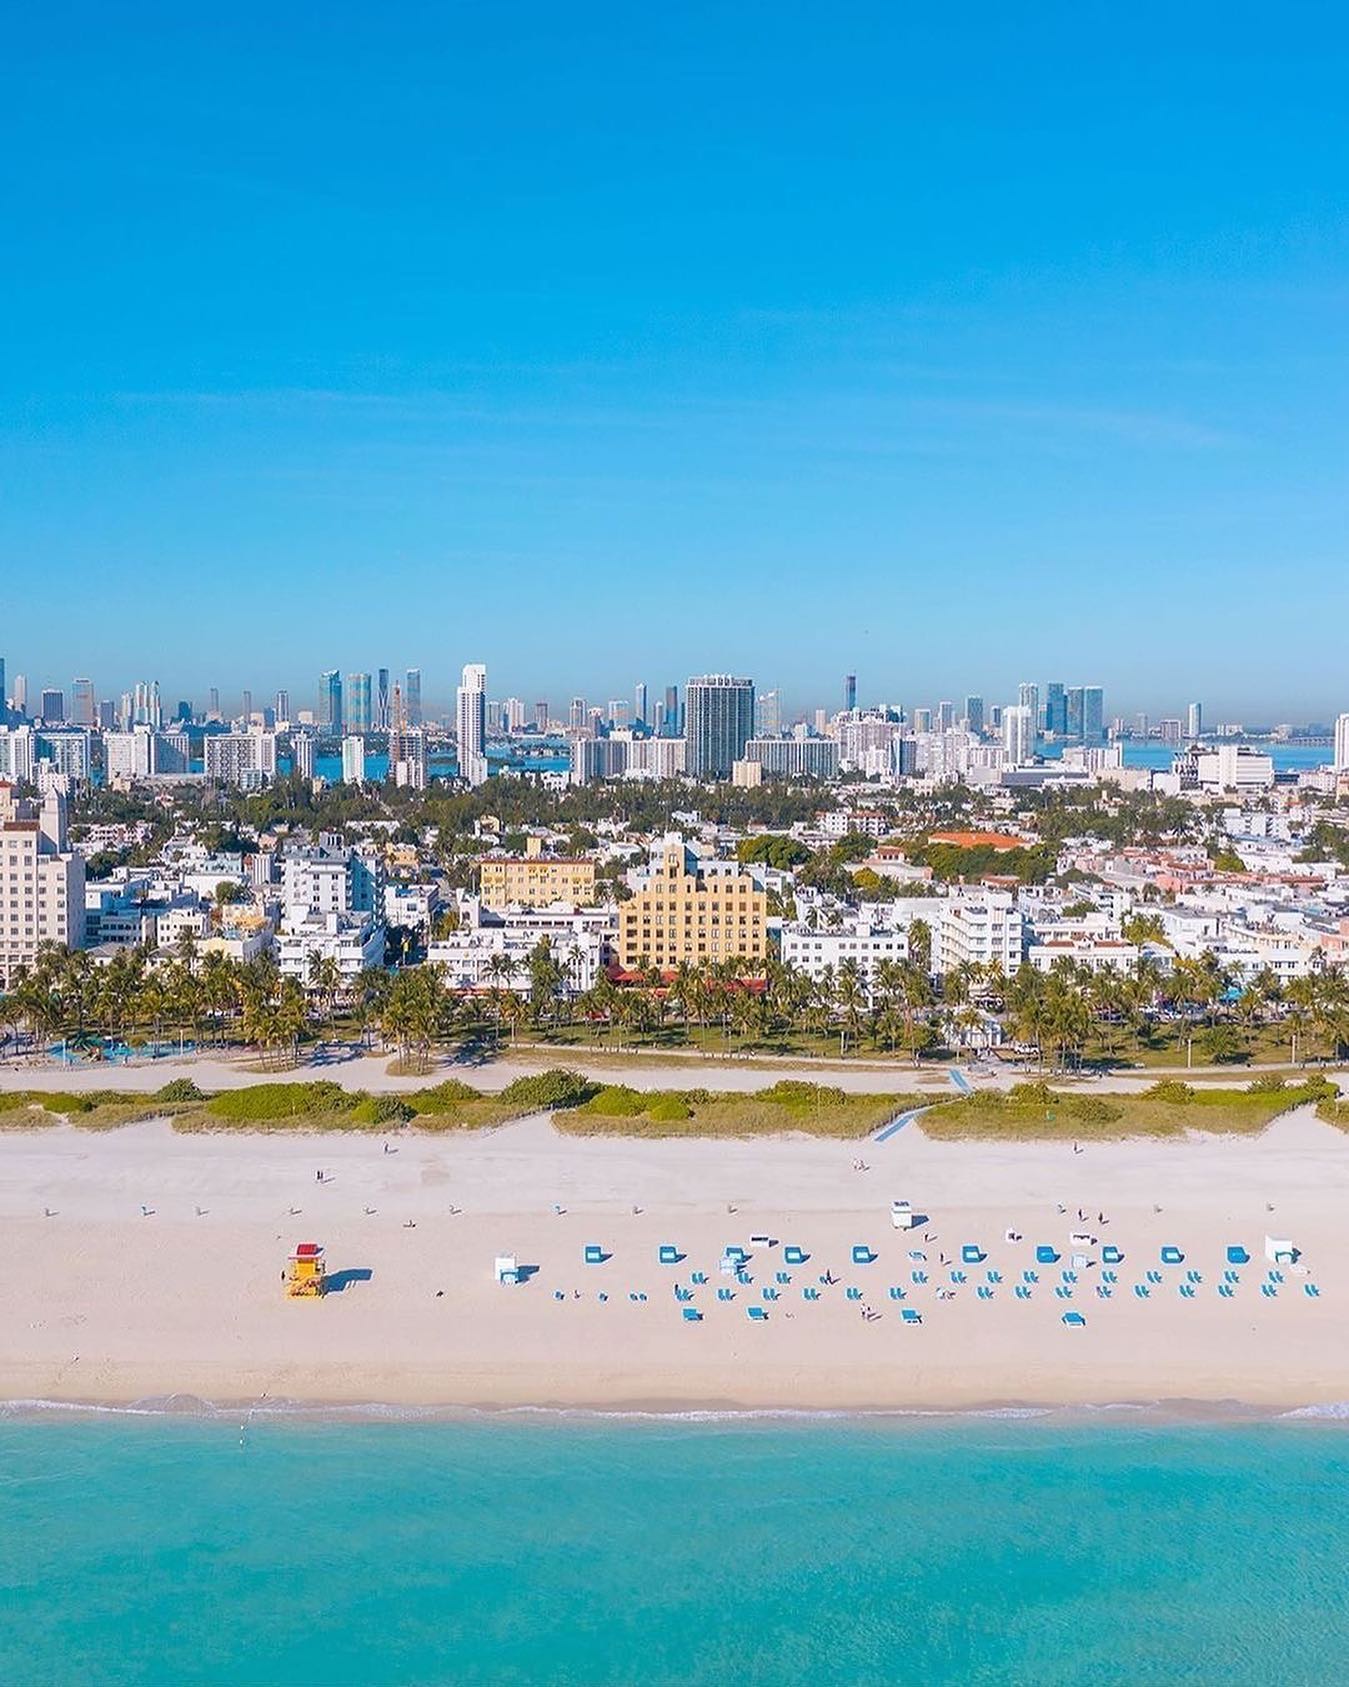 The Unofficial Summer Season Begins in May on Miami Beach with a Variety of Travel-Worthy Experiences and Activities